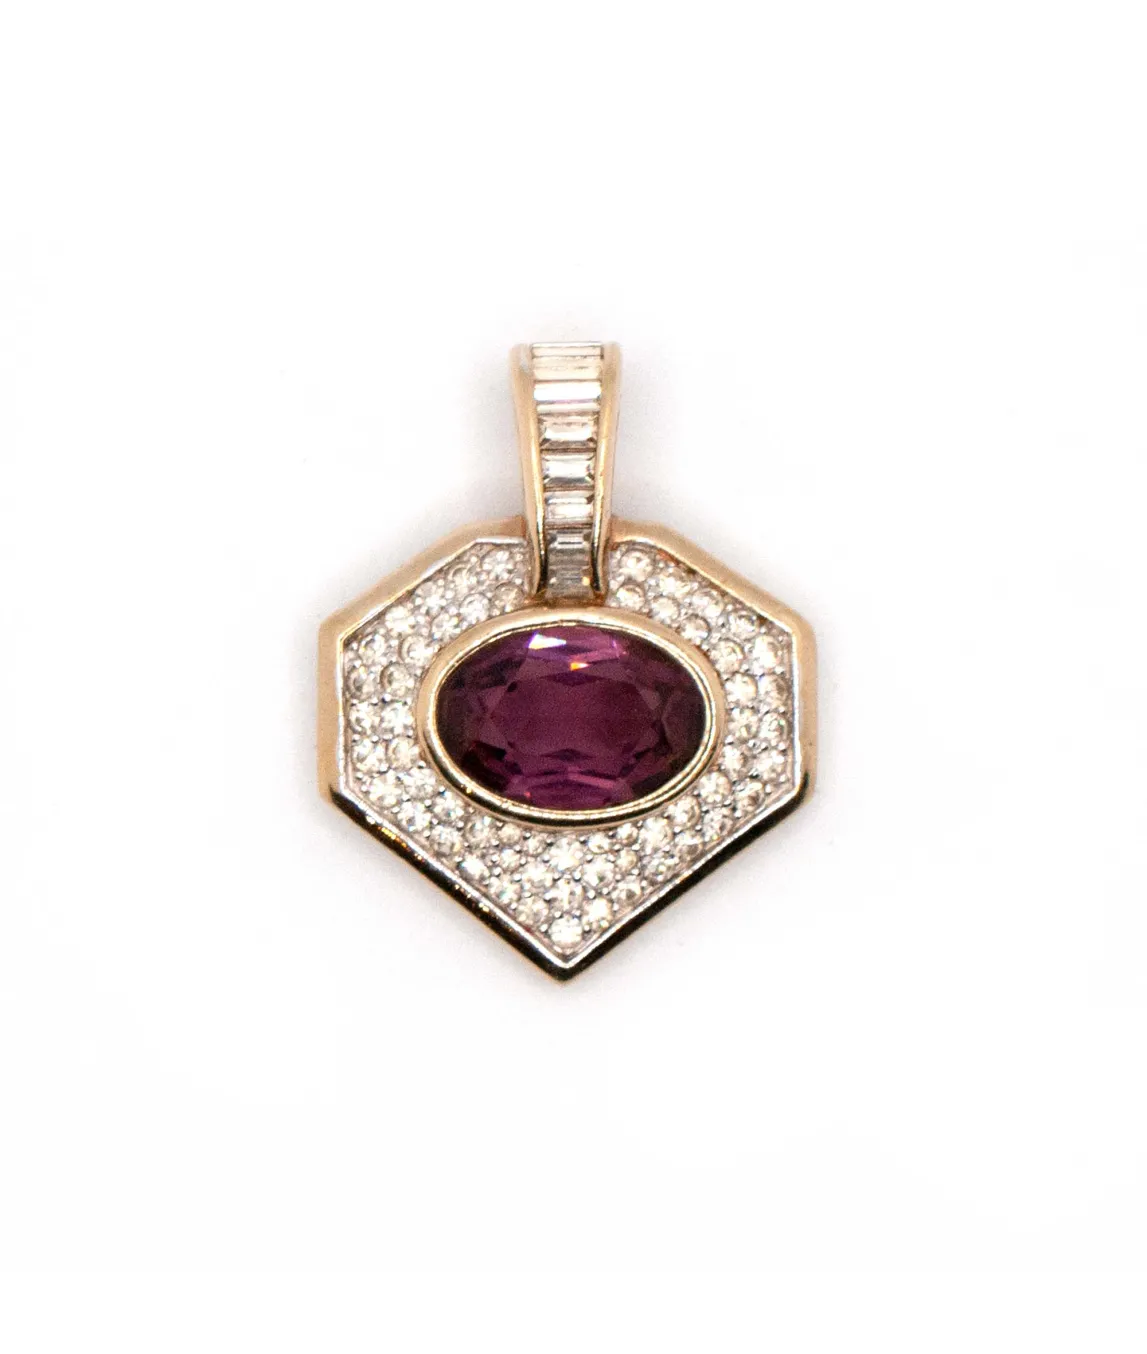 Panetta rhinestone and amethyst glass pendant set in gold plated metal